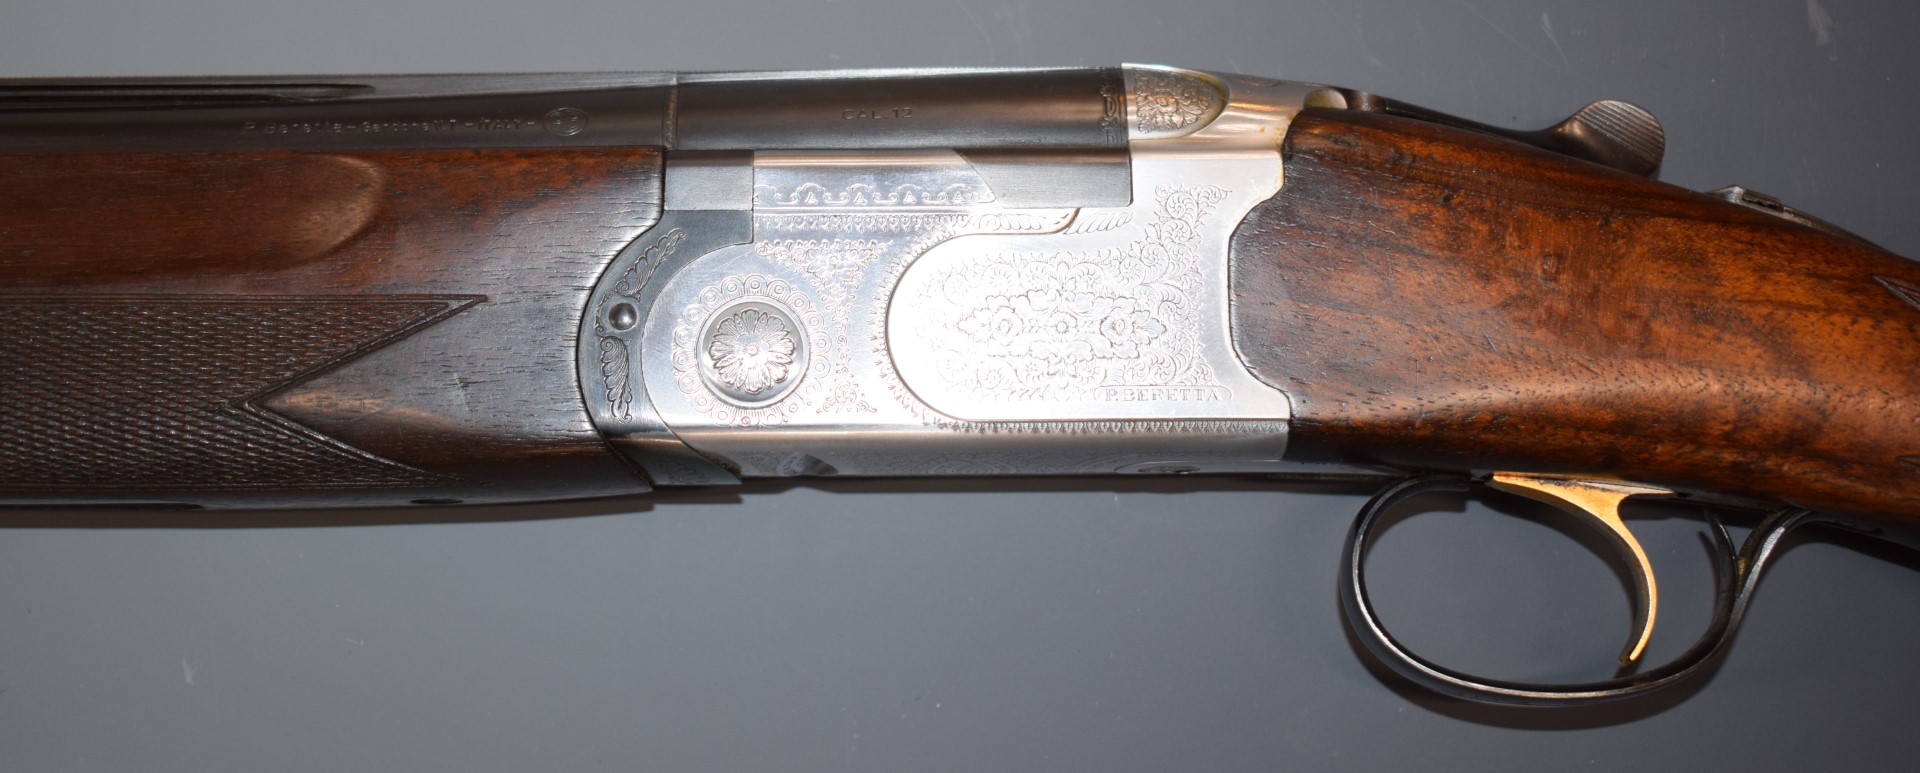 Beretta 686 Special 12 bore over and under ejector shotgun with with all over floral engraving, - Image 7 of 8